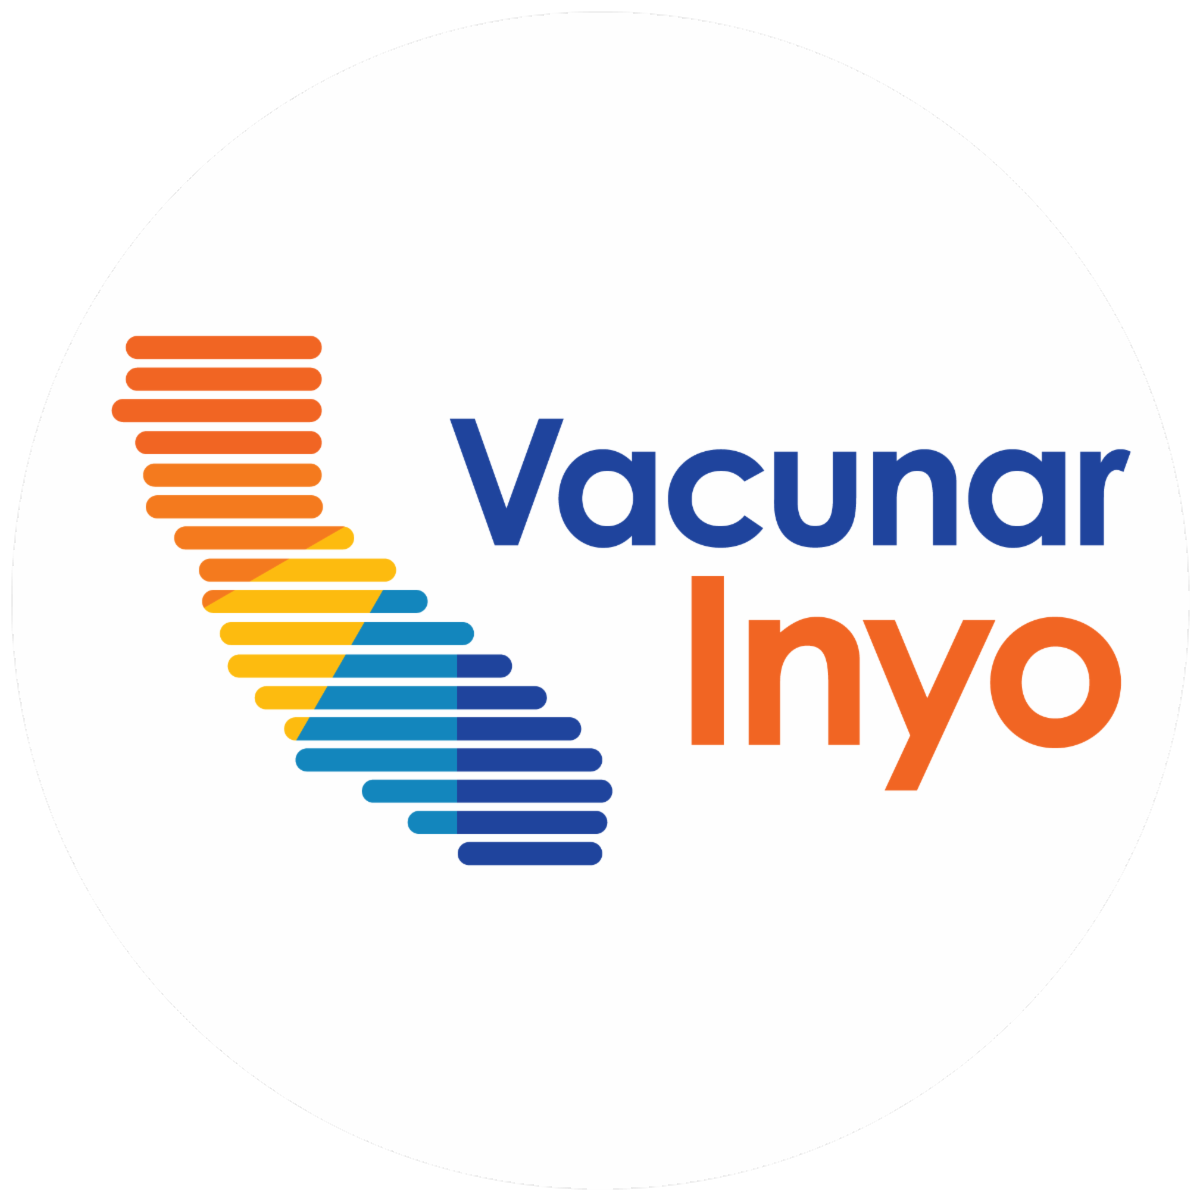 20210526_ICHHS_vaccinate-inyo-spa-logo-b_001.png